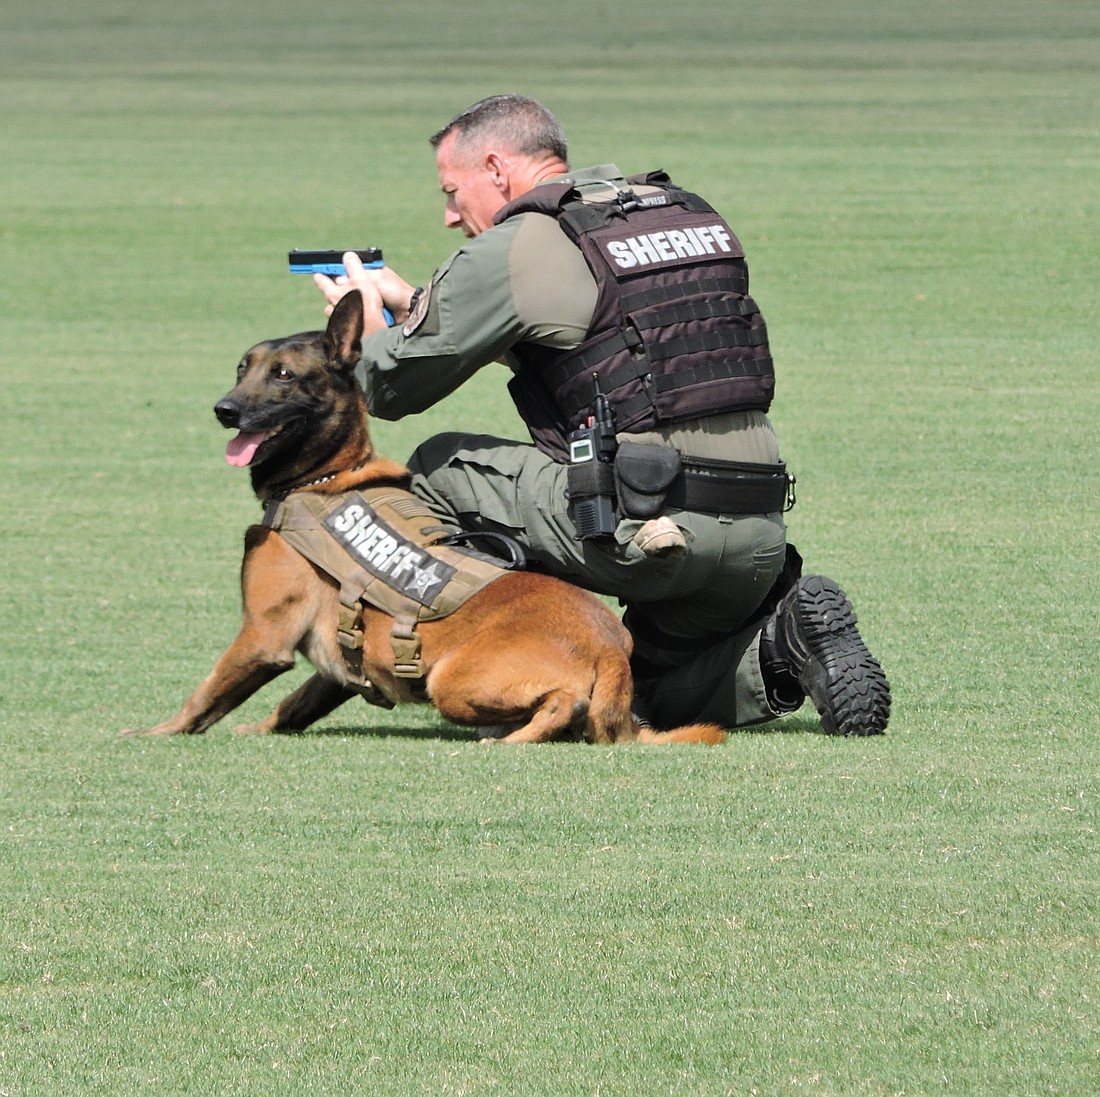 Deputy Mike Gerholdt and his dog, Boey, show the discipline needed when confronting a suspect.